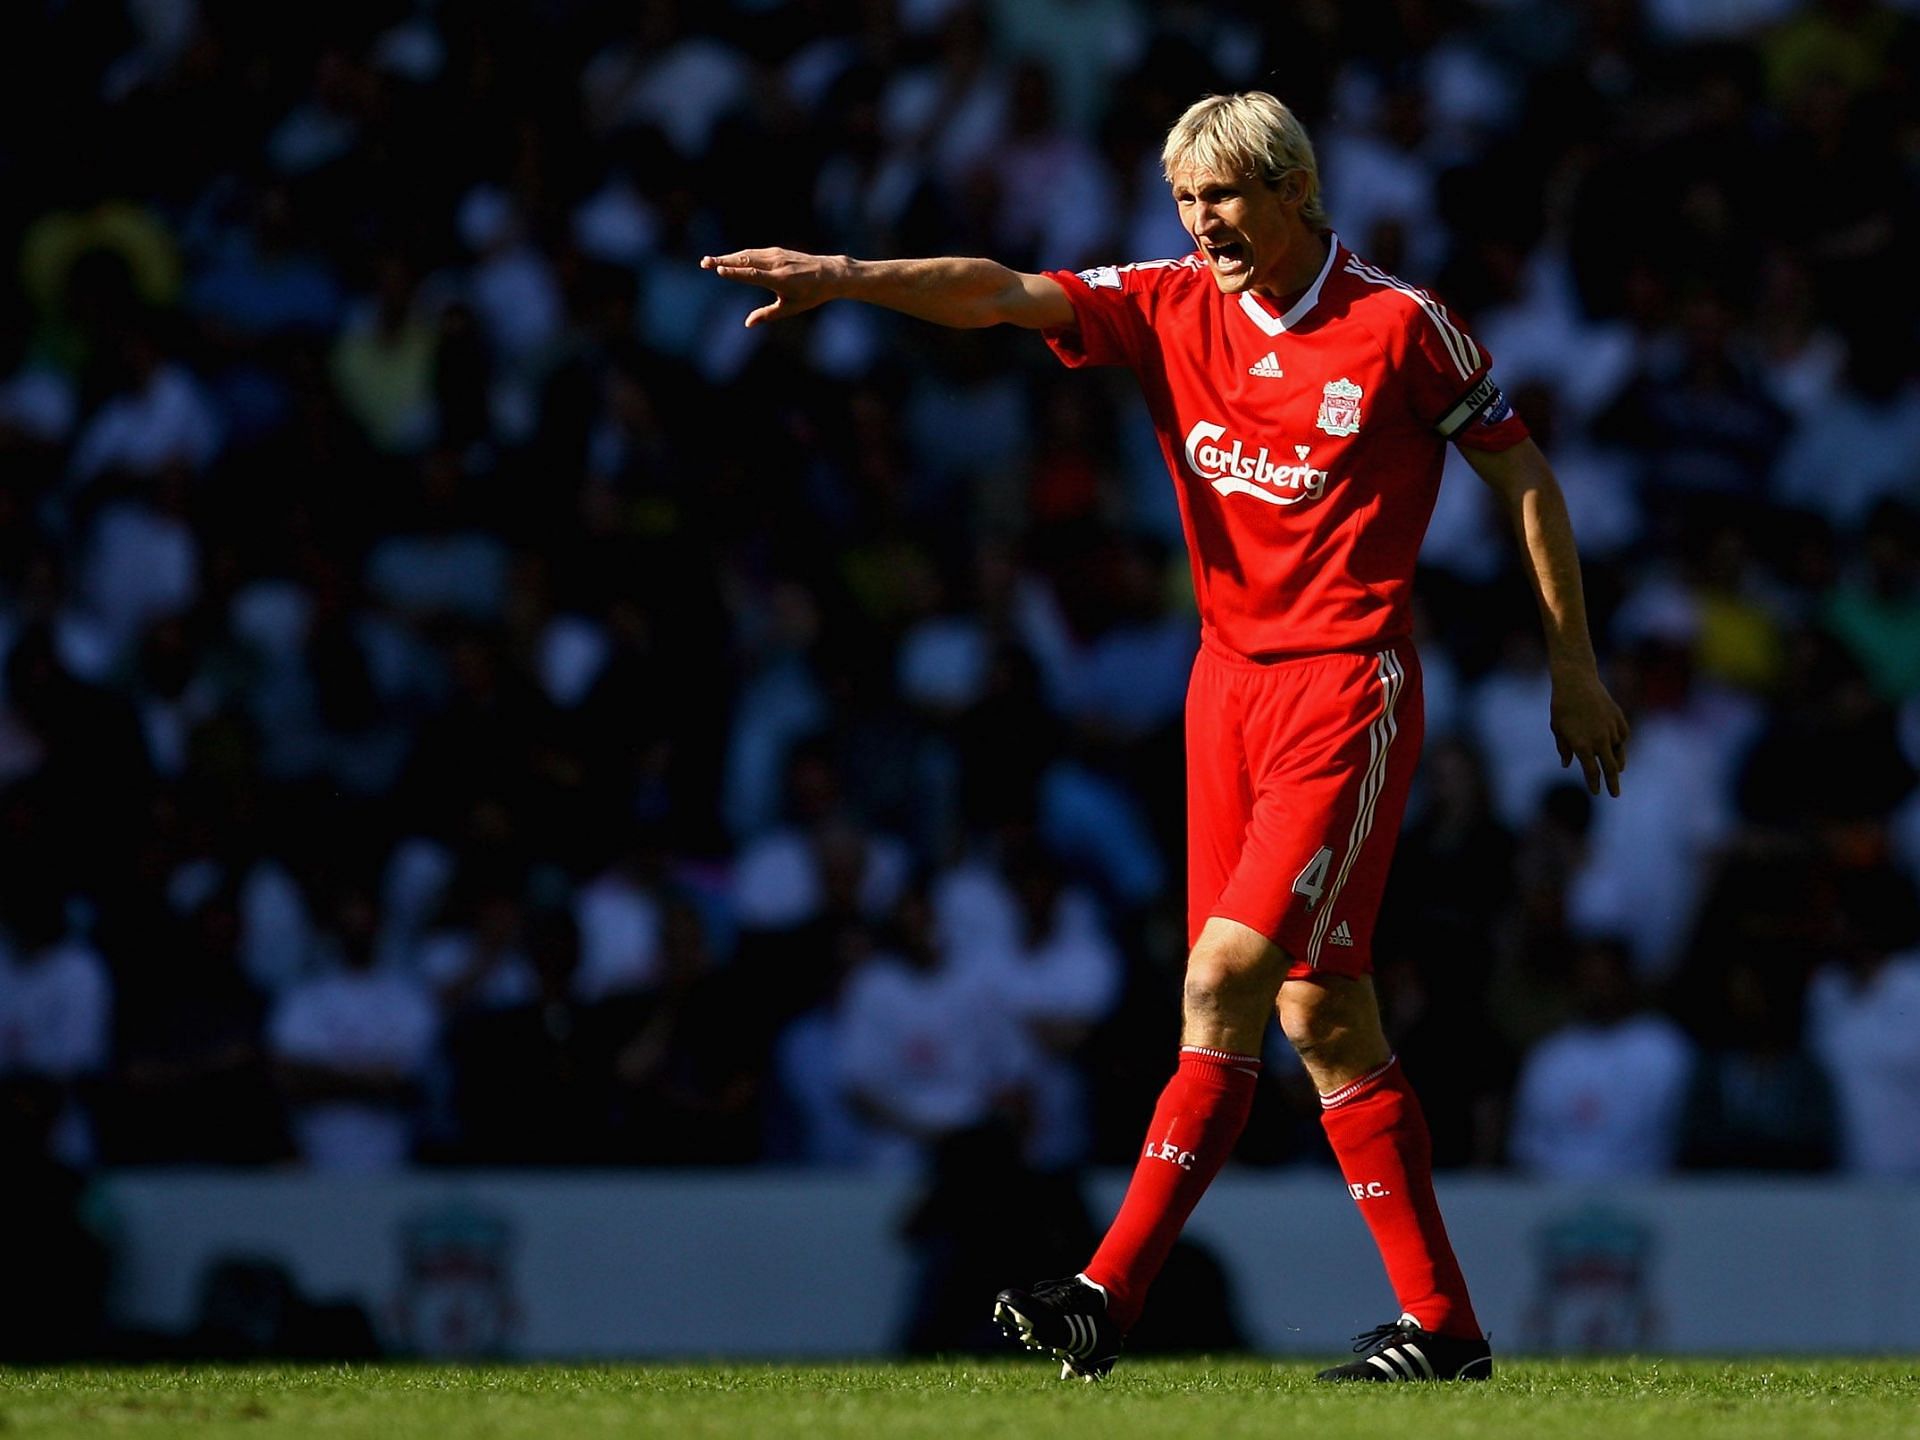 Sami Hyypia was a leader of men at Liverpool